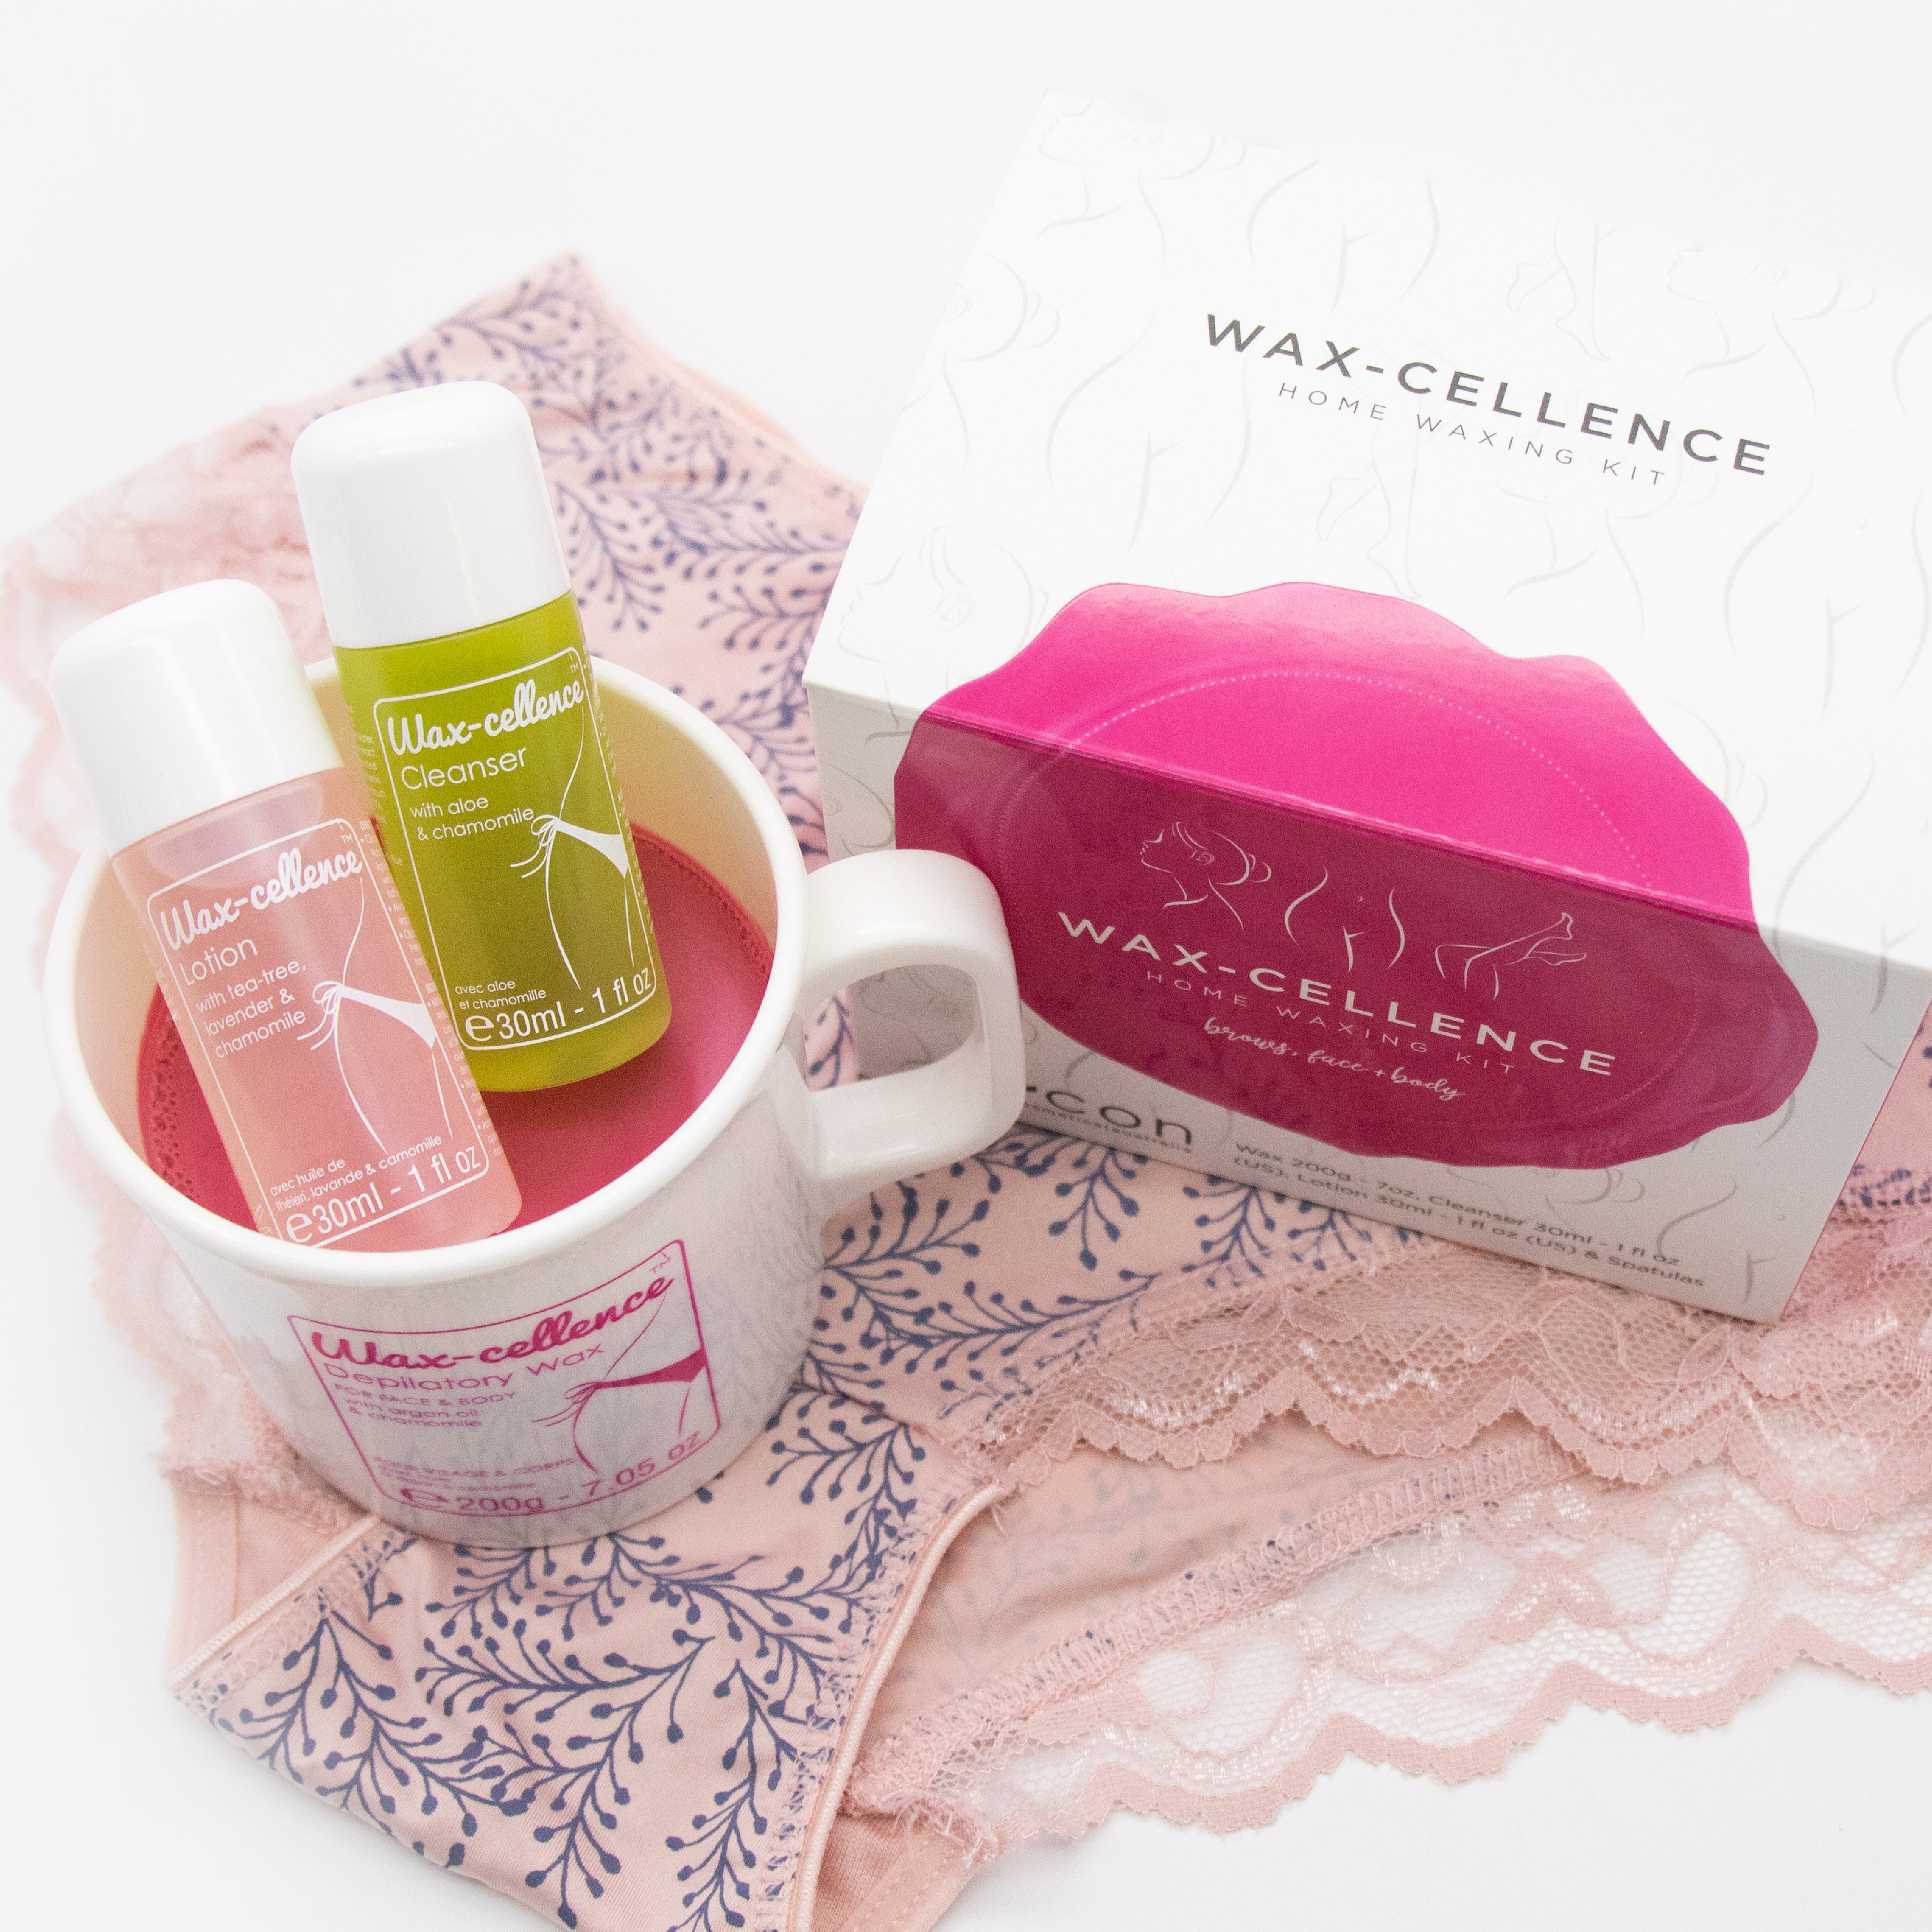 WAX-CELLENCE Home Waxing Kit – Perfect for DIY home waxing - Retail